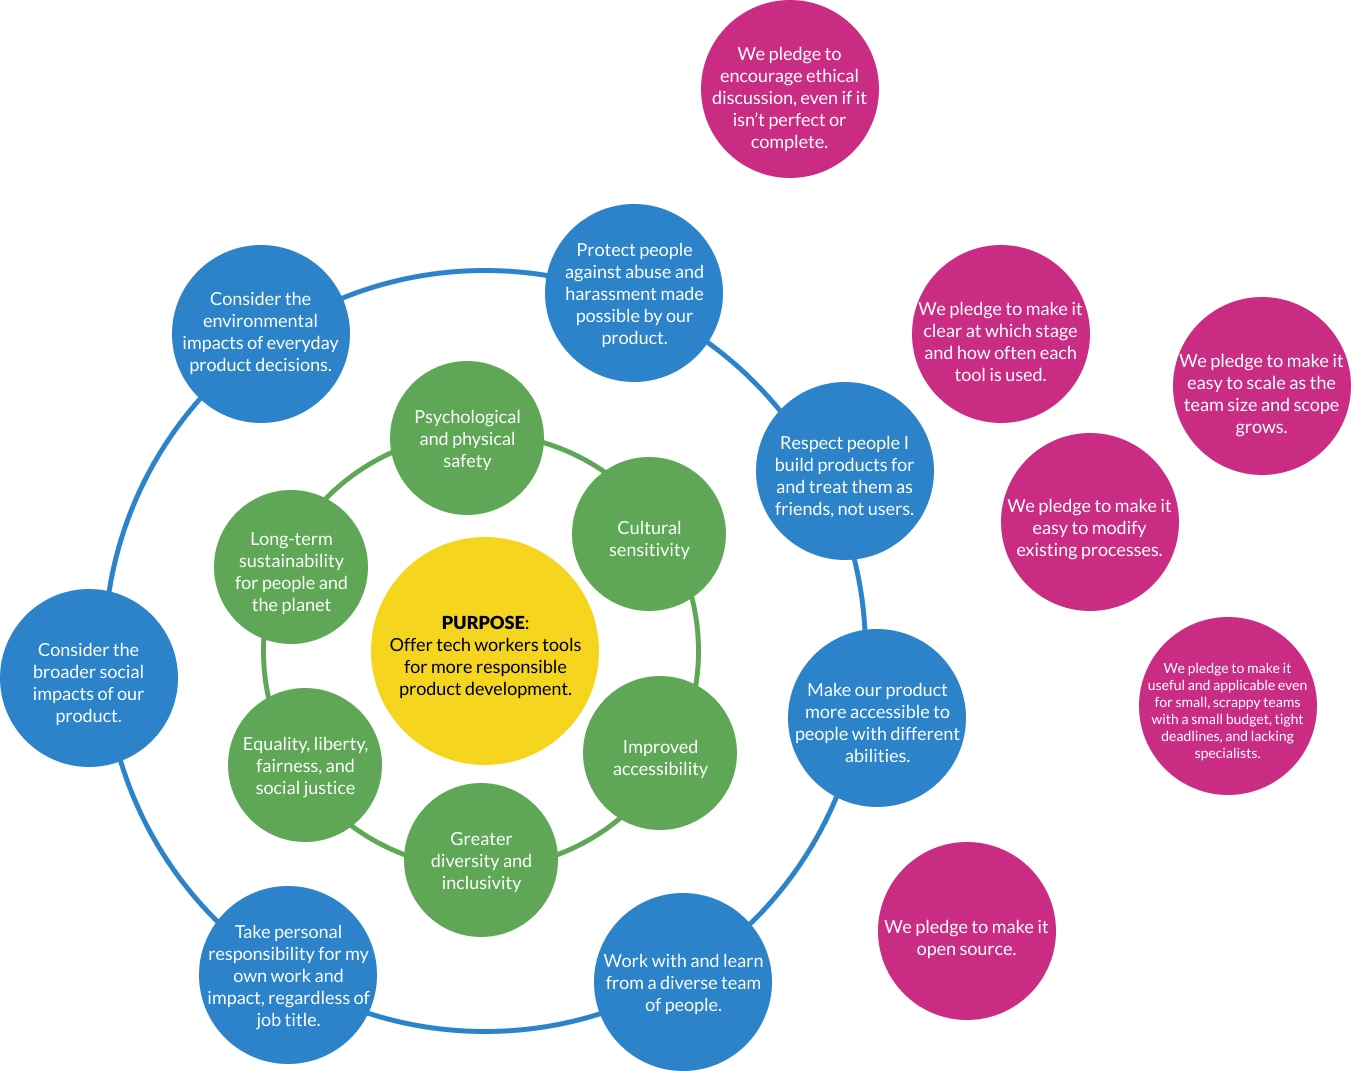 The example shows the elements described above with ResponsibleTech.Work's purpose, values, principles and tools related pledges filled in the colored circles. Most of the tools-related pledges in purple circles are clustered around the pledge about respecting people.